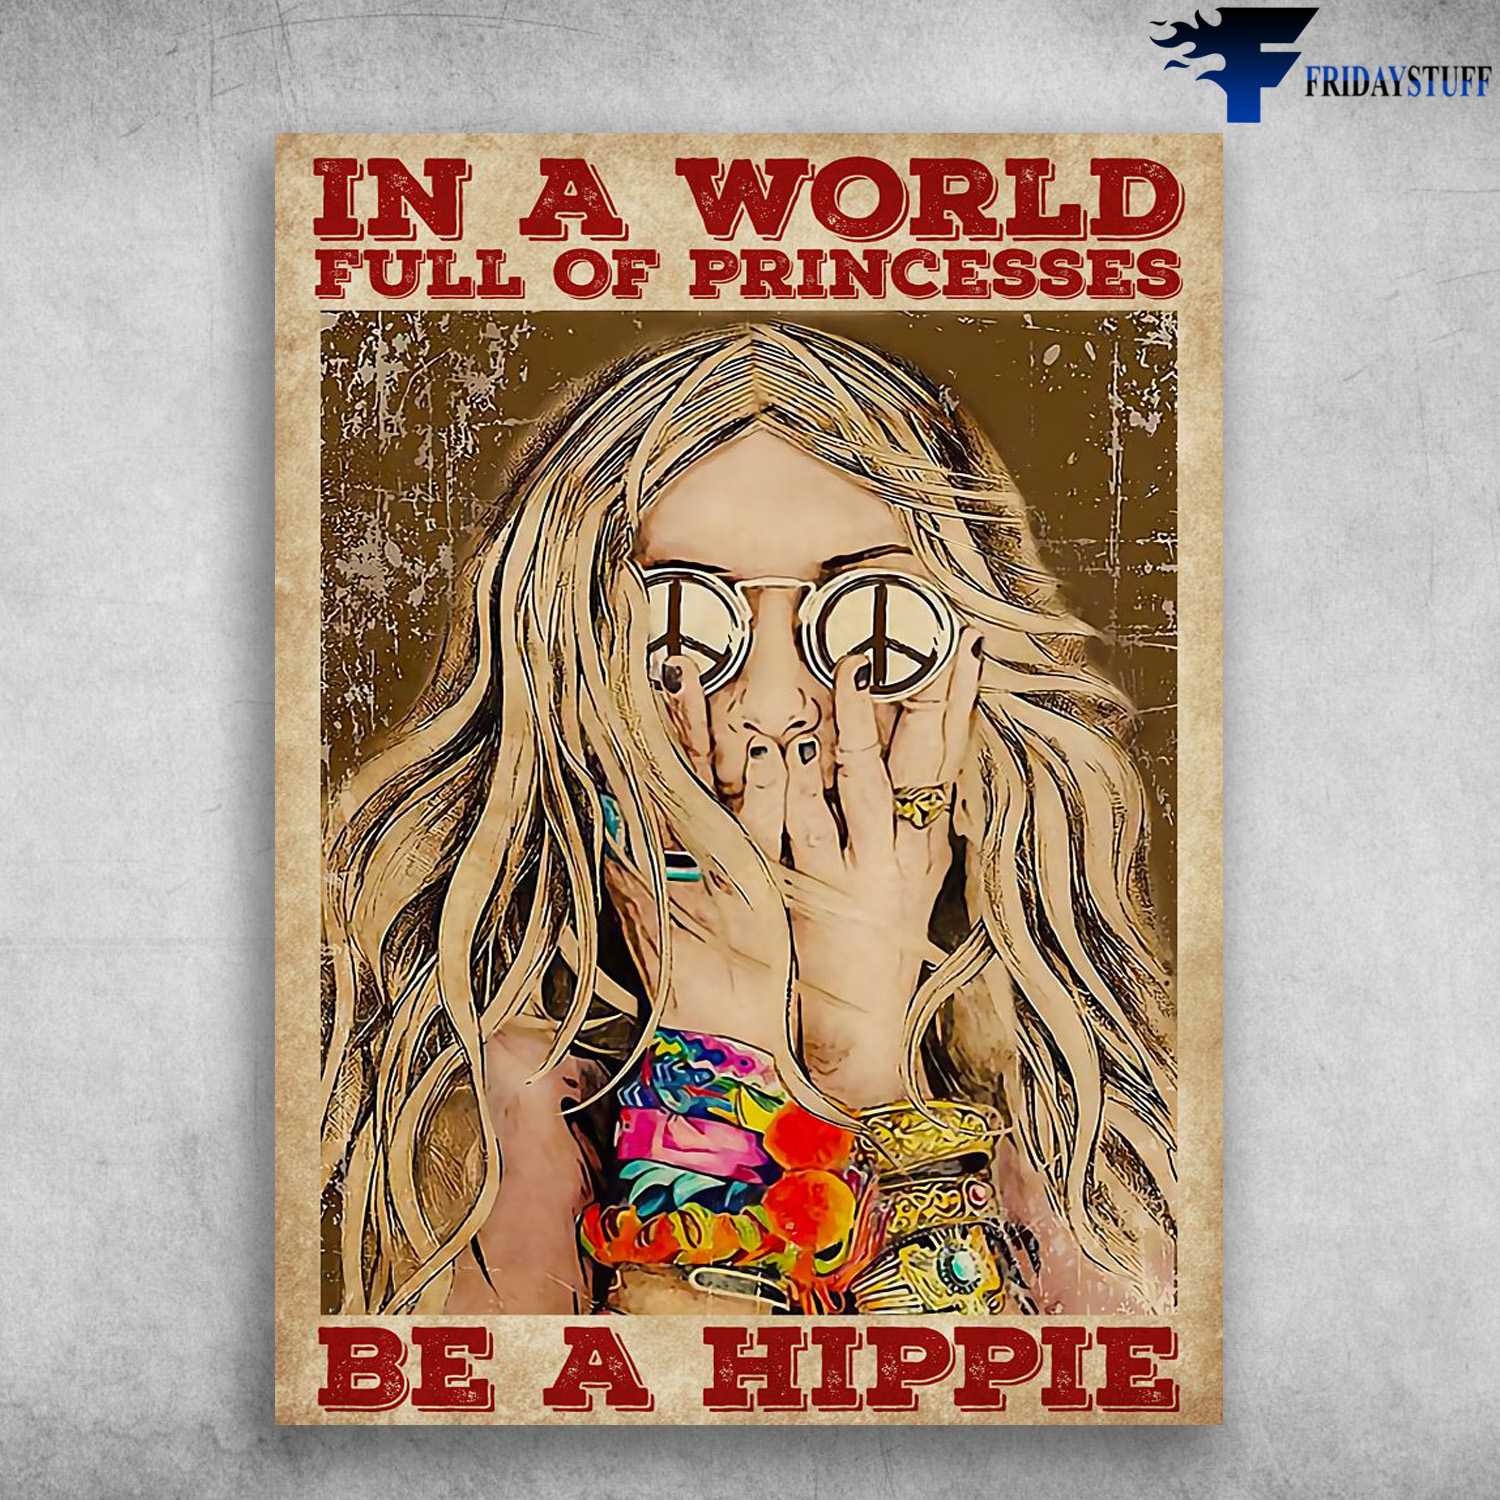 Hippie Girl, Hippie Poster, In A World Full Of Princesses, Be A Hippie